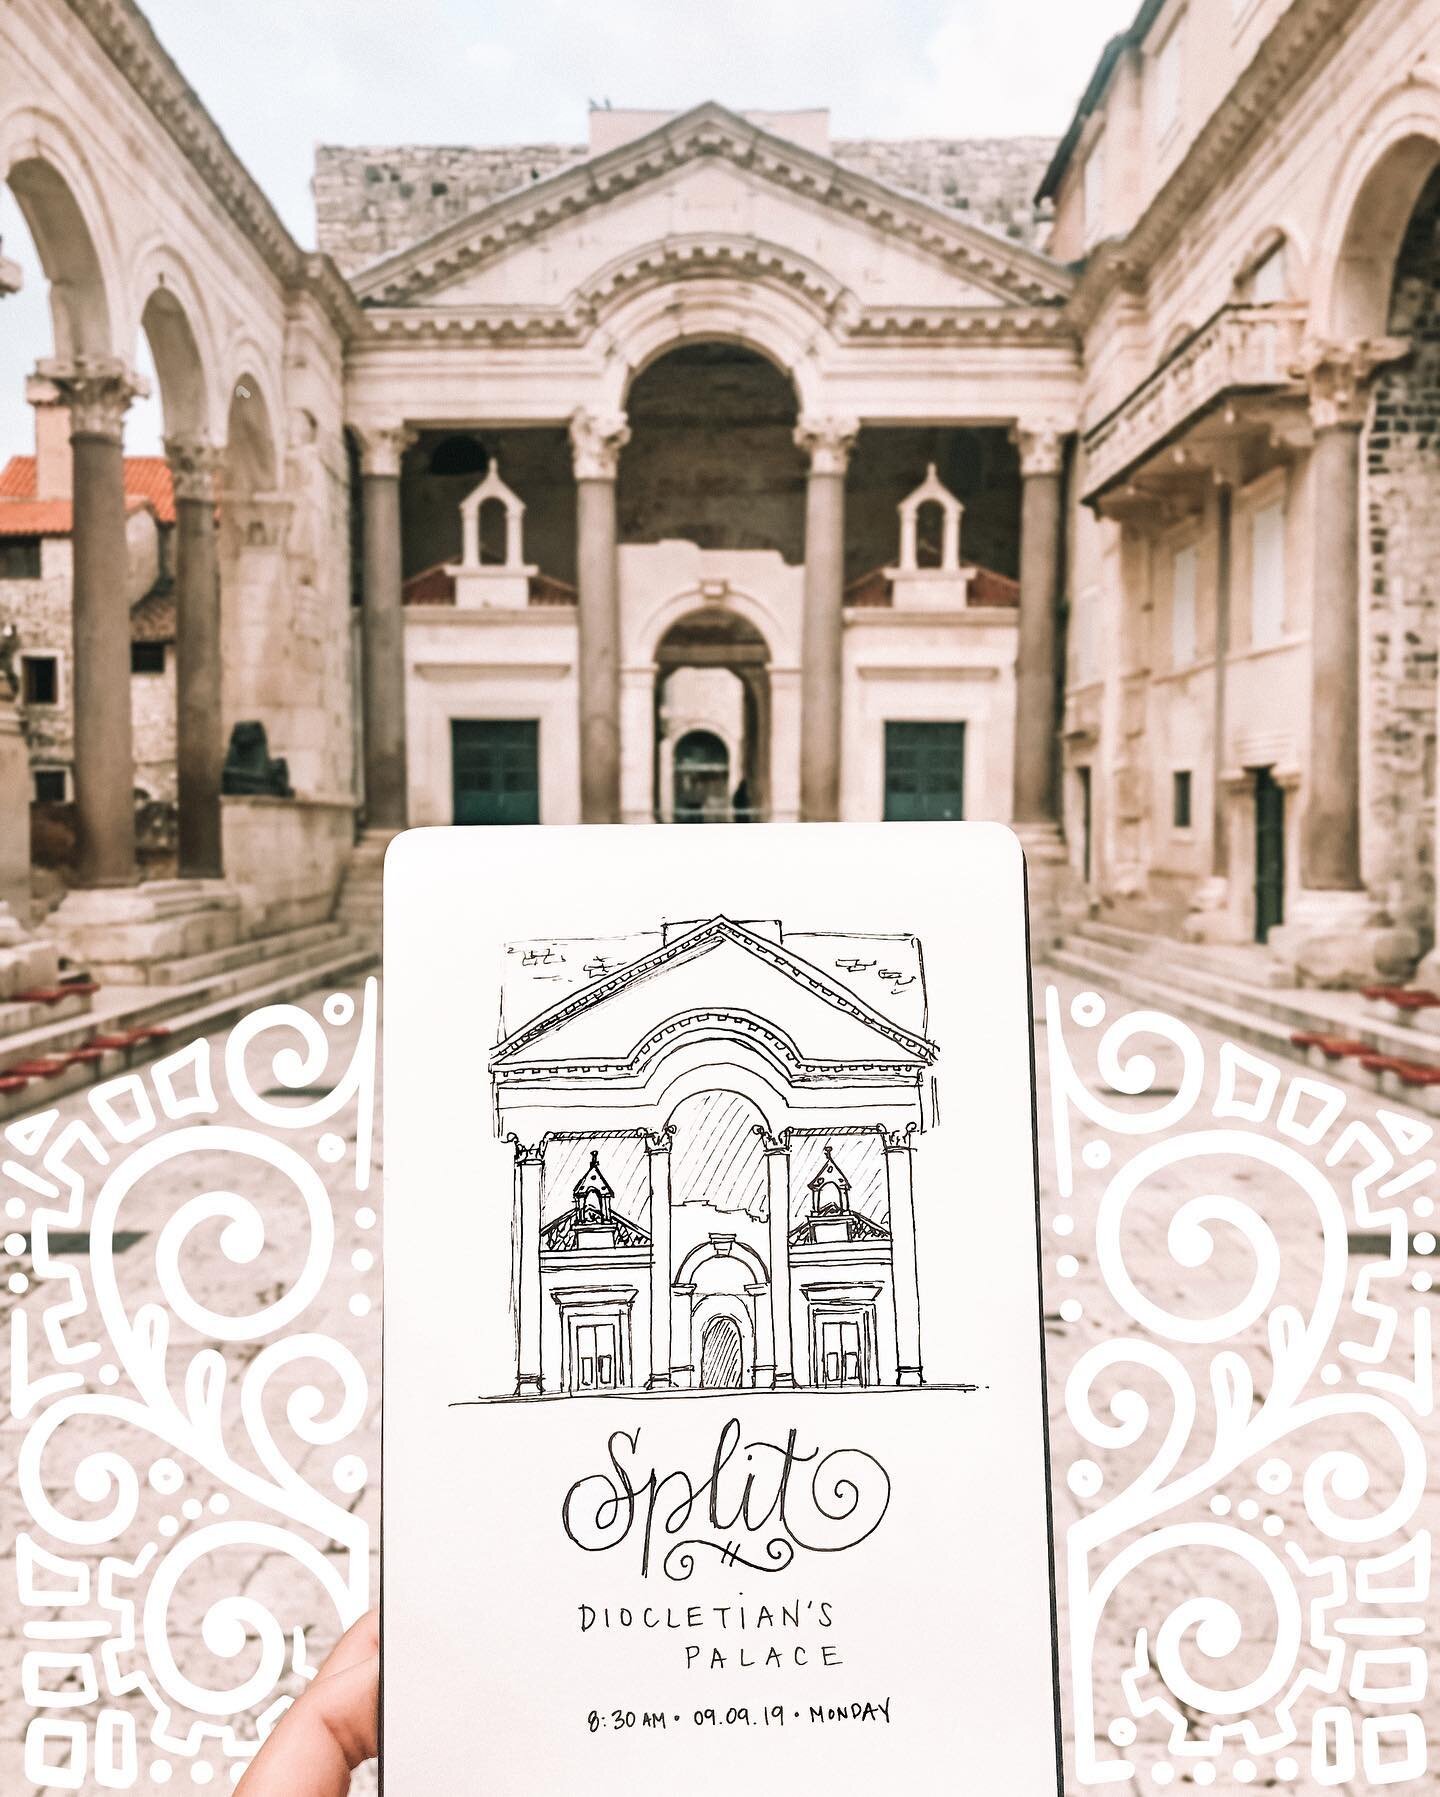 Double the doodle. 🏛🖋 I miss Monday mornings spent xploring Croatia with my sketchbook. xx
.
.
.
09&bull;09&bull;19